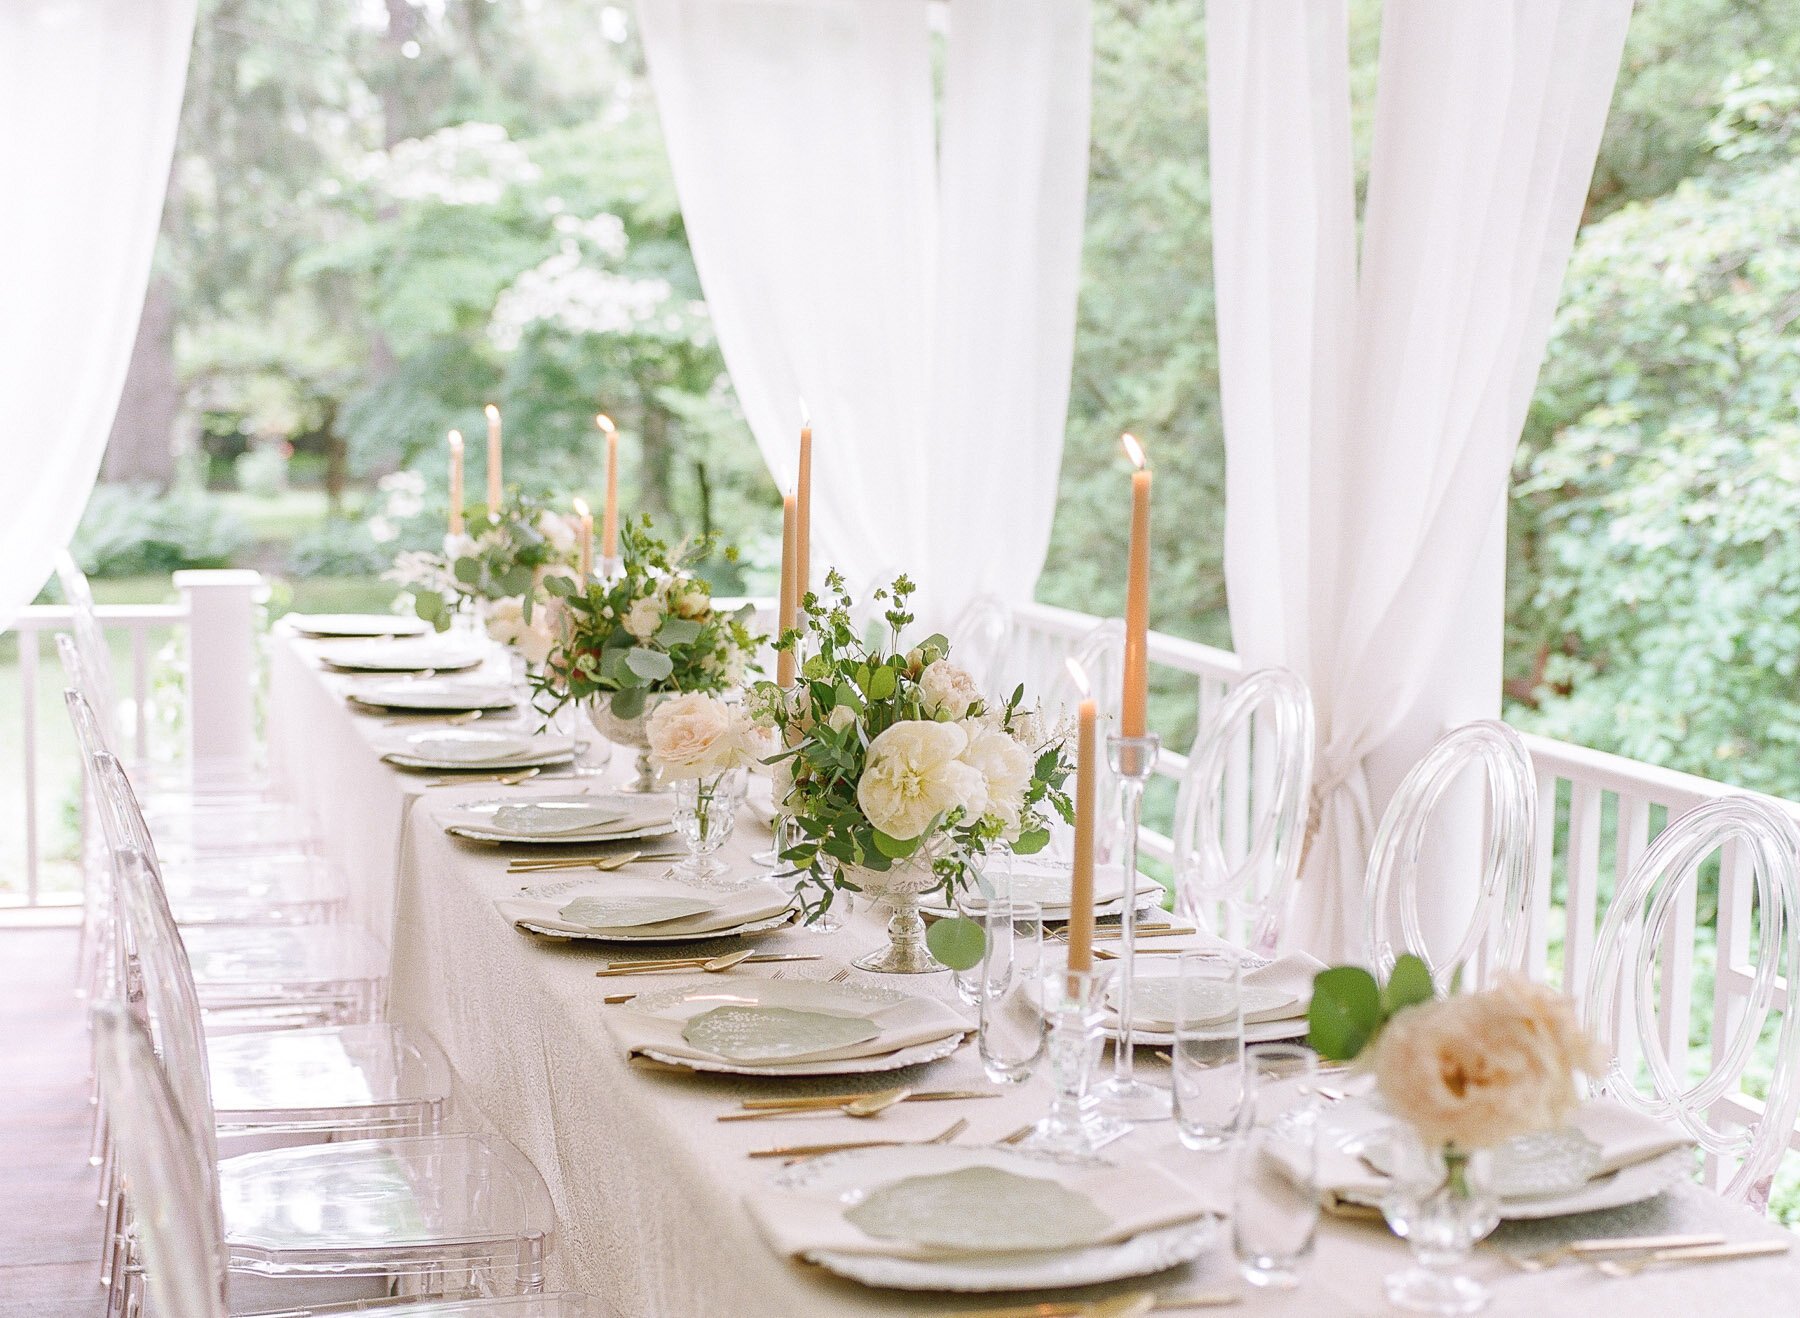 Intimate Backyard wedding in Upstate NY by Kelly Strong Events